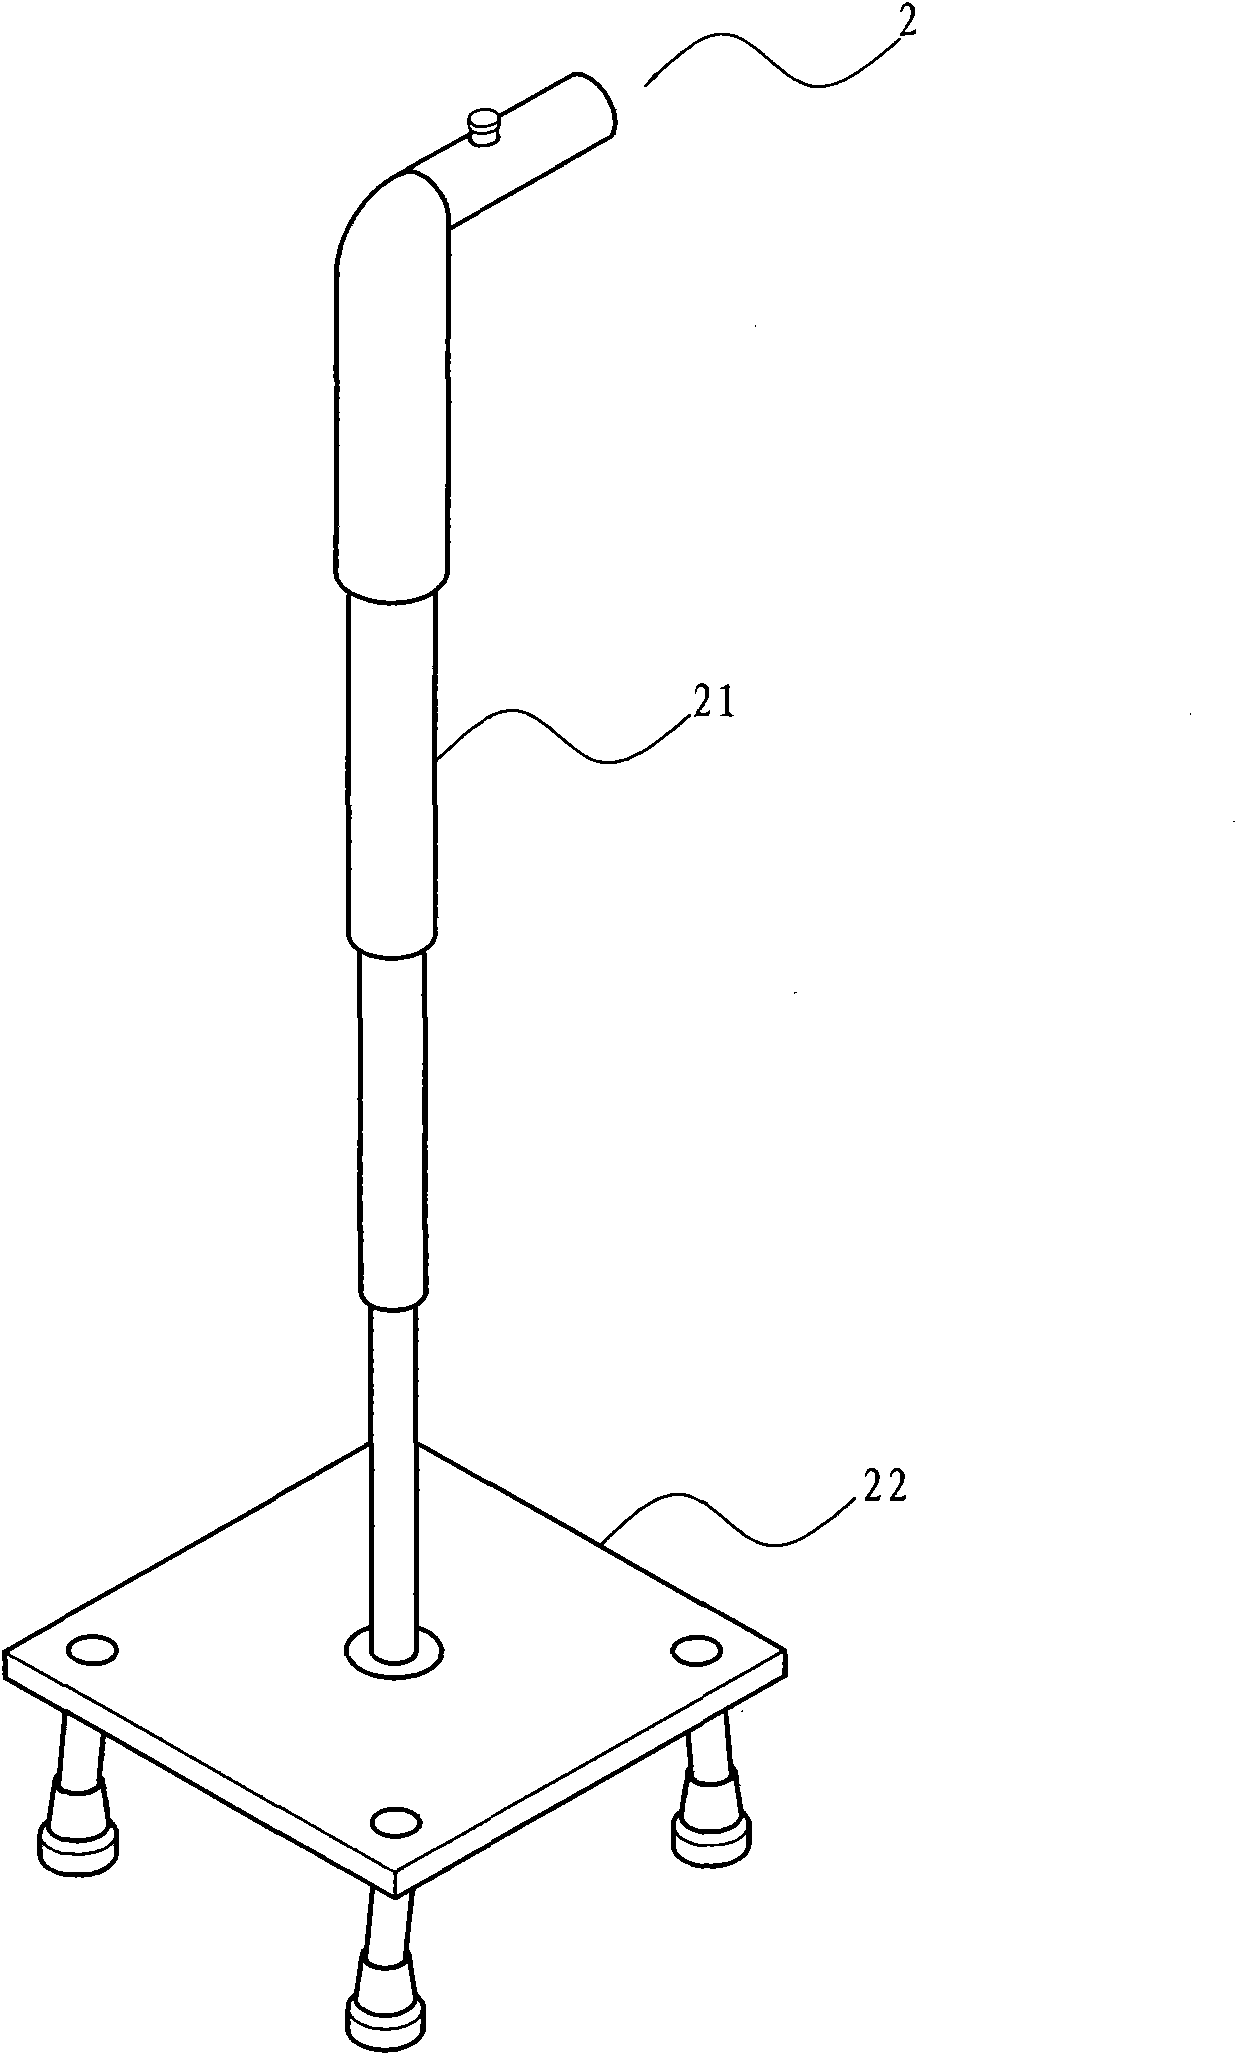 Crutch with controllable rod length through pressure sensing and method thereof for controlling rod length